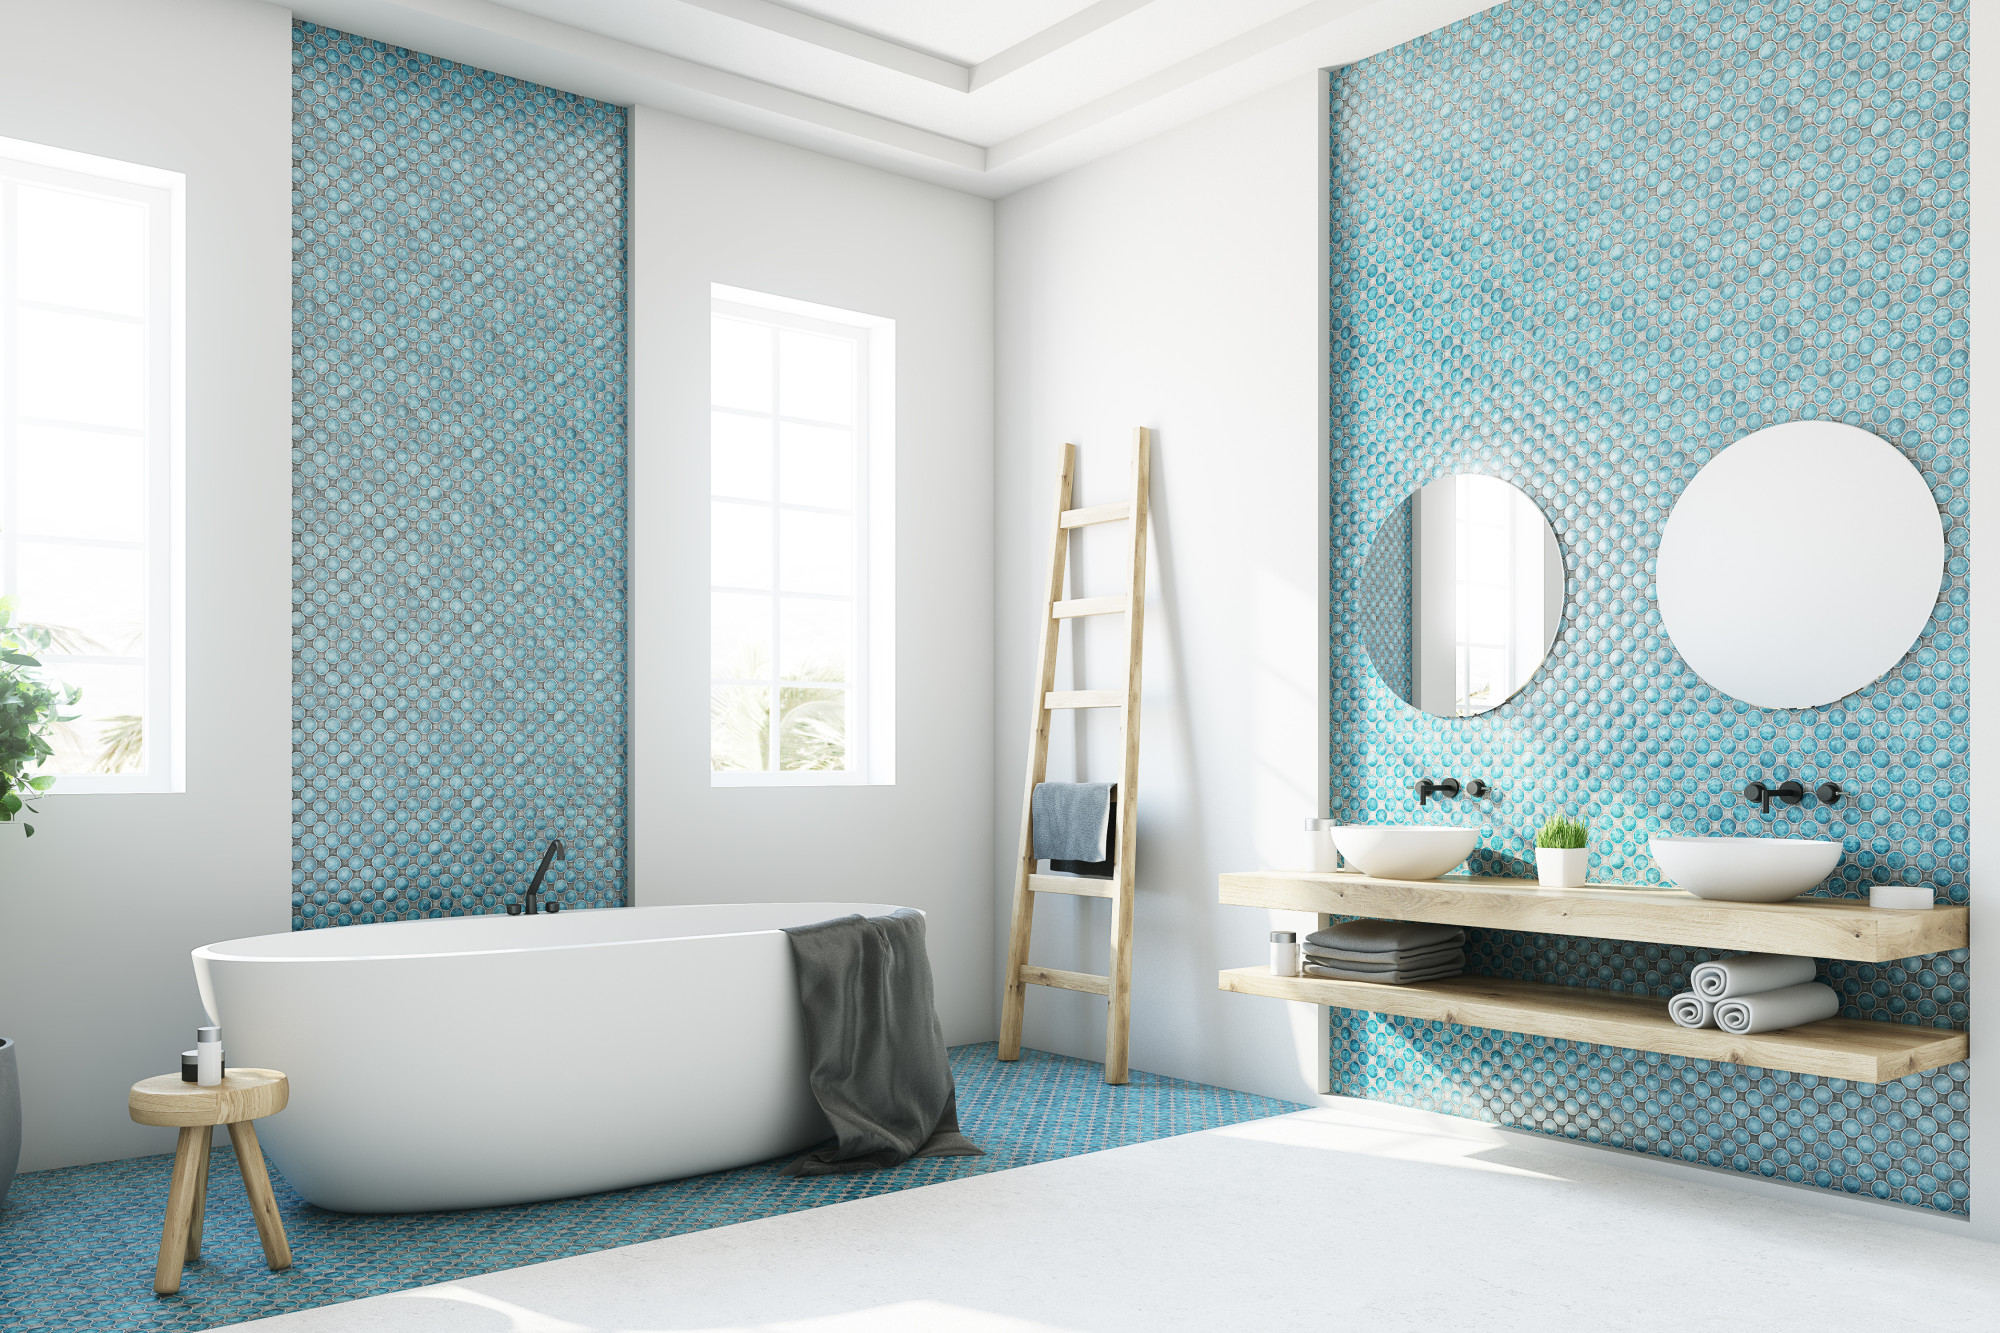 There are several ways you can transform your bathroom this year. Check out this guide for some of the most popular bathroom trends.